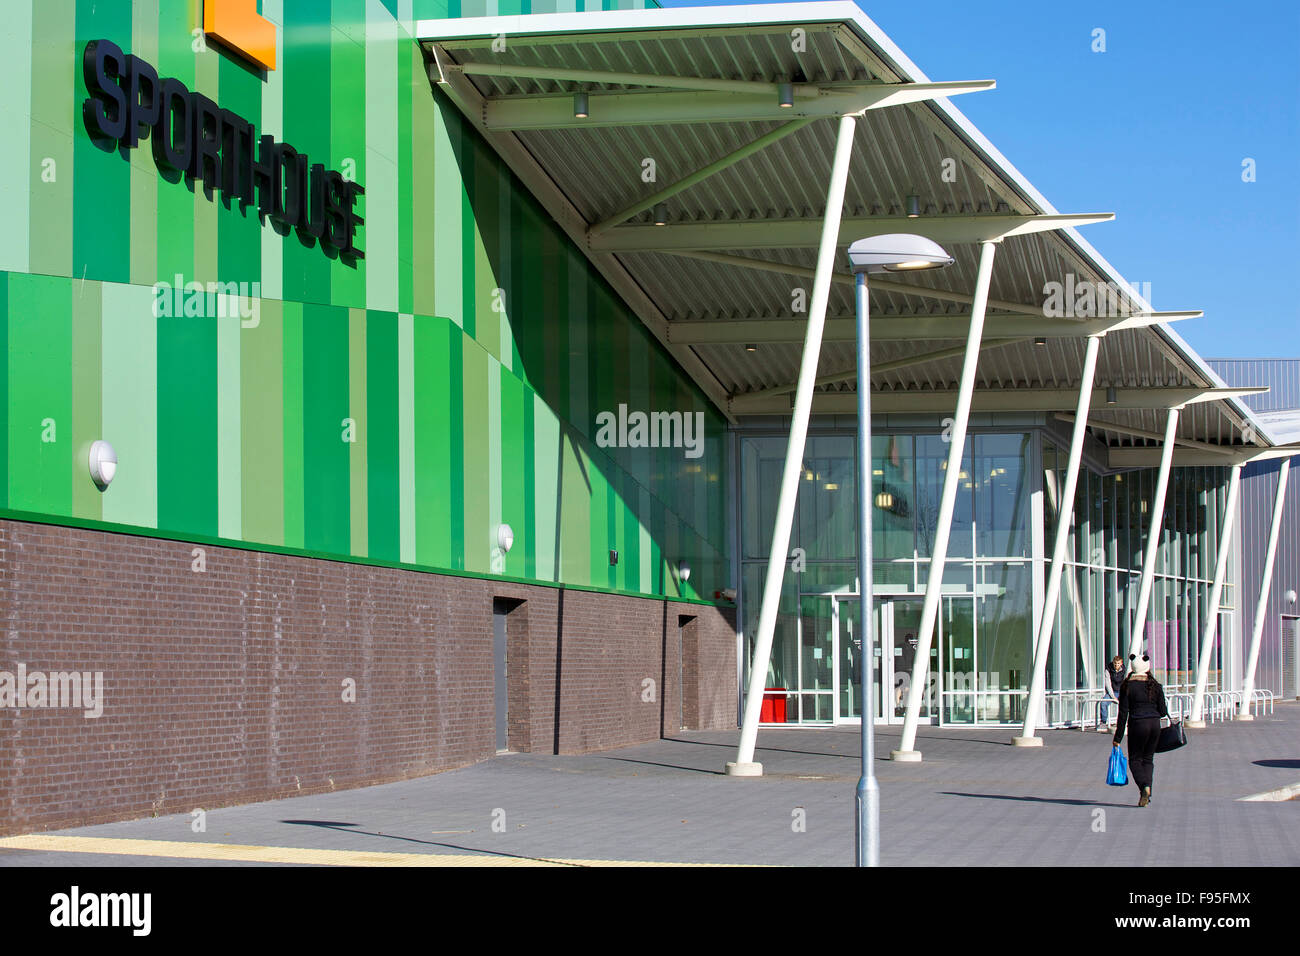 Sporthouse, Mayesbrook Park Sports Arena, Dagenham. Close view of the exterior of the Sporthouse venue and a visitor walking towards the entrance. Stock Photo